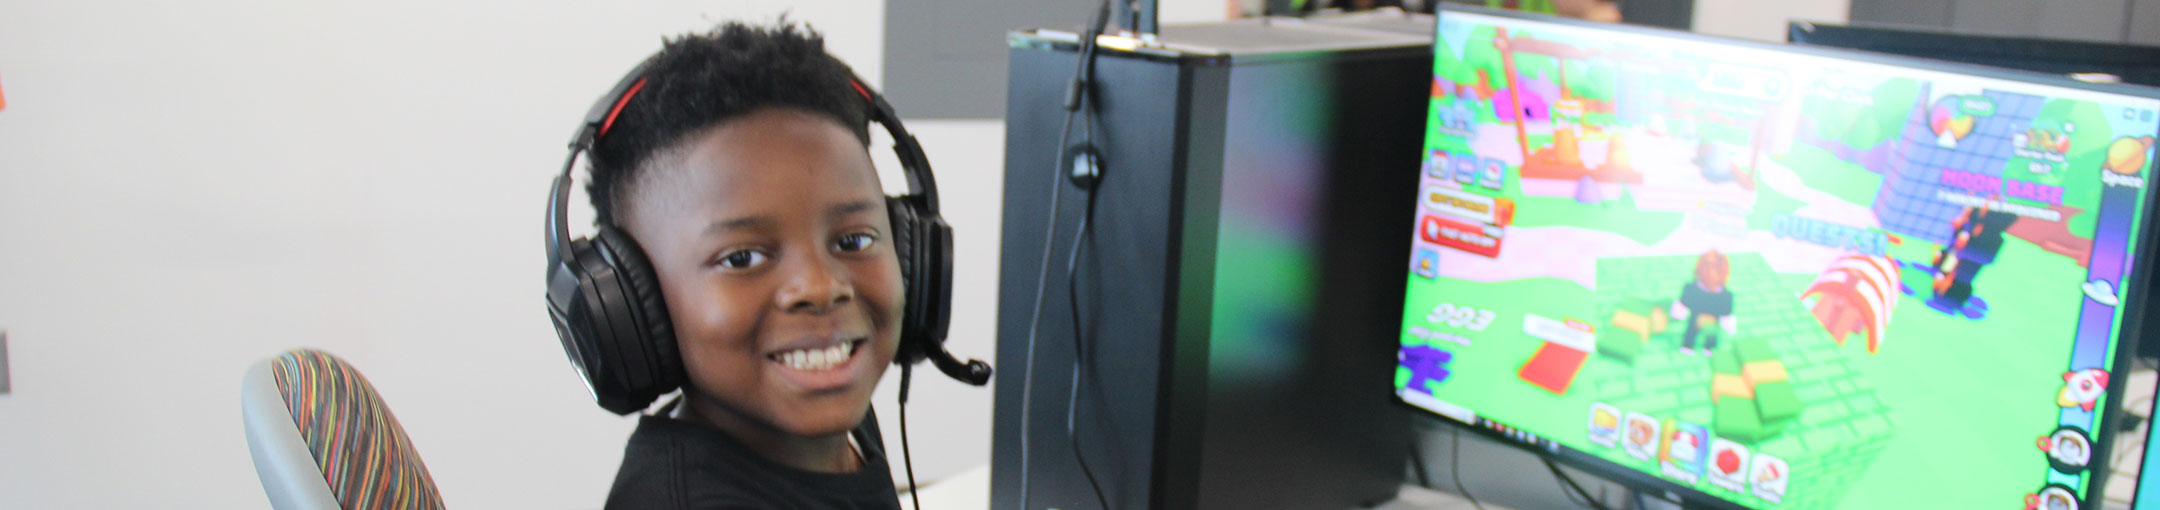 a person playing a video game and smiling